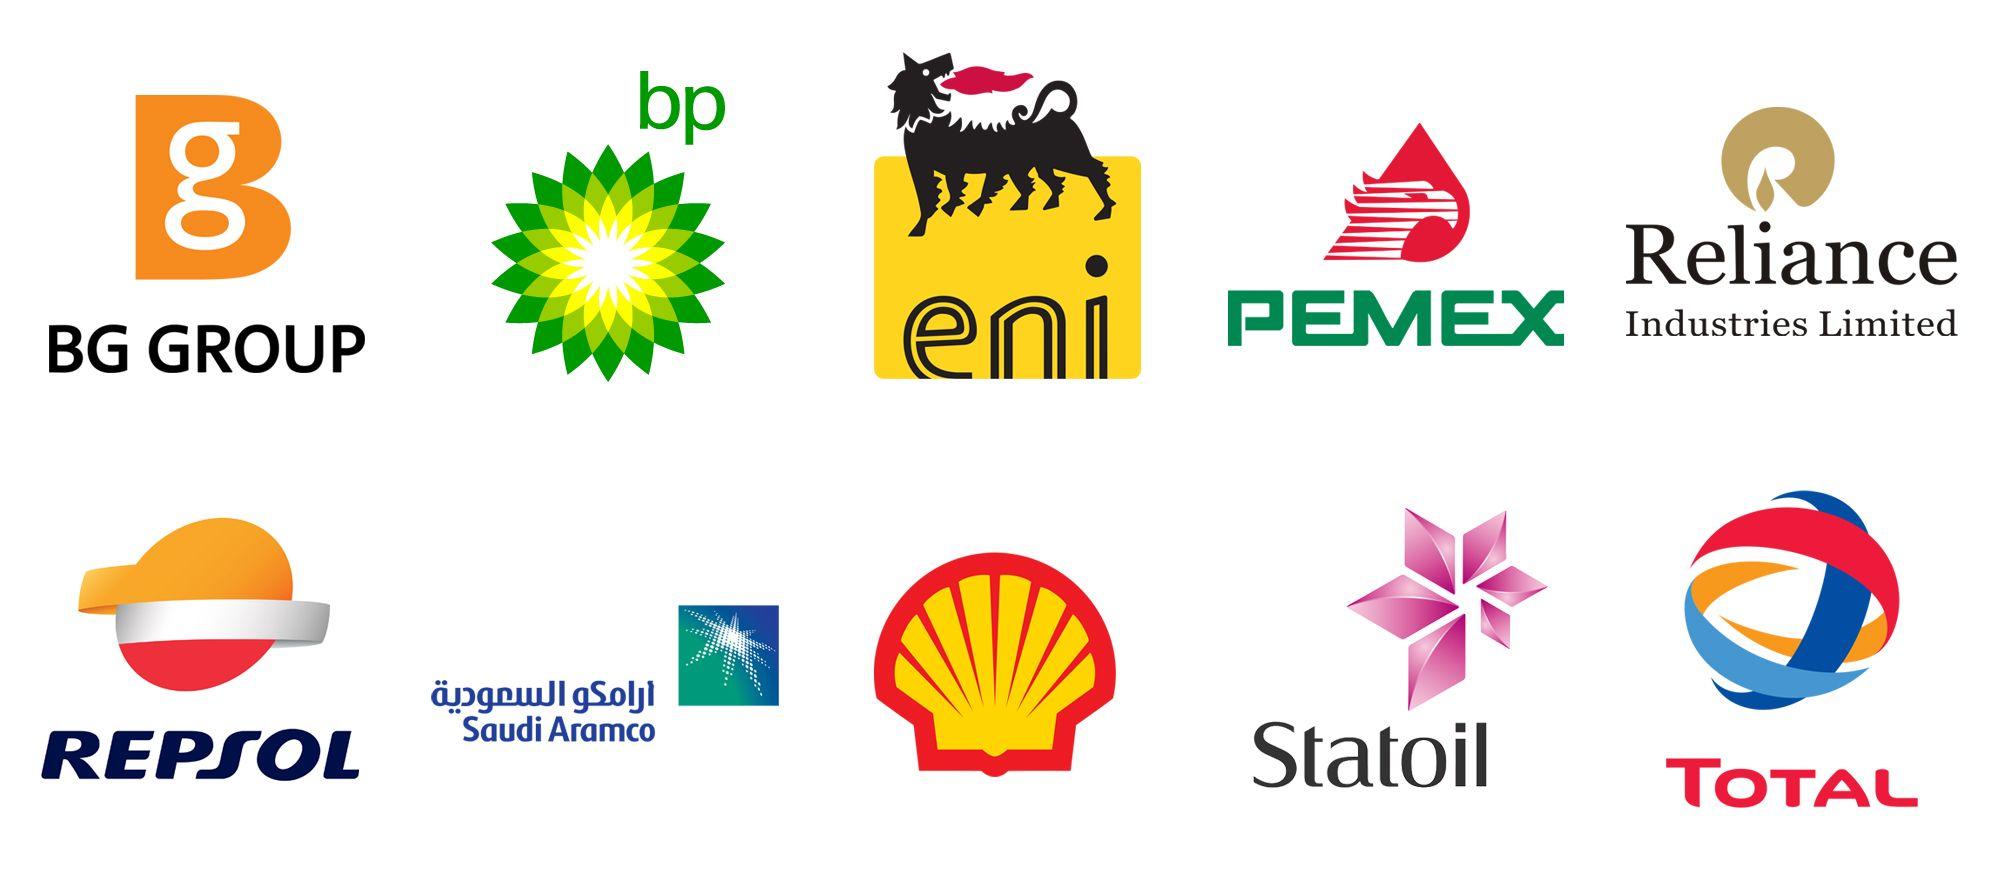 Total Oil Company Logo - Oil and gas Logos